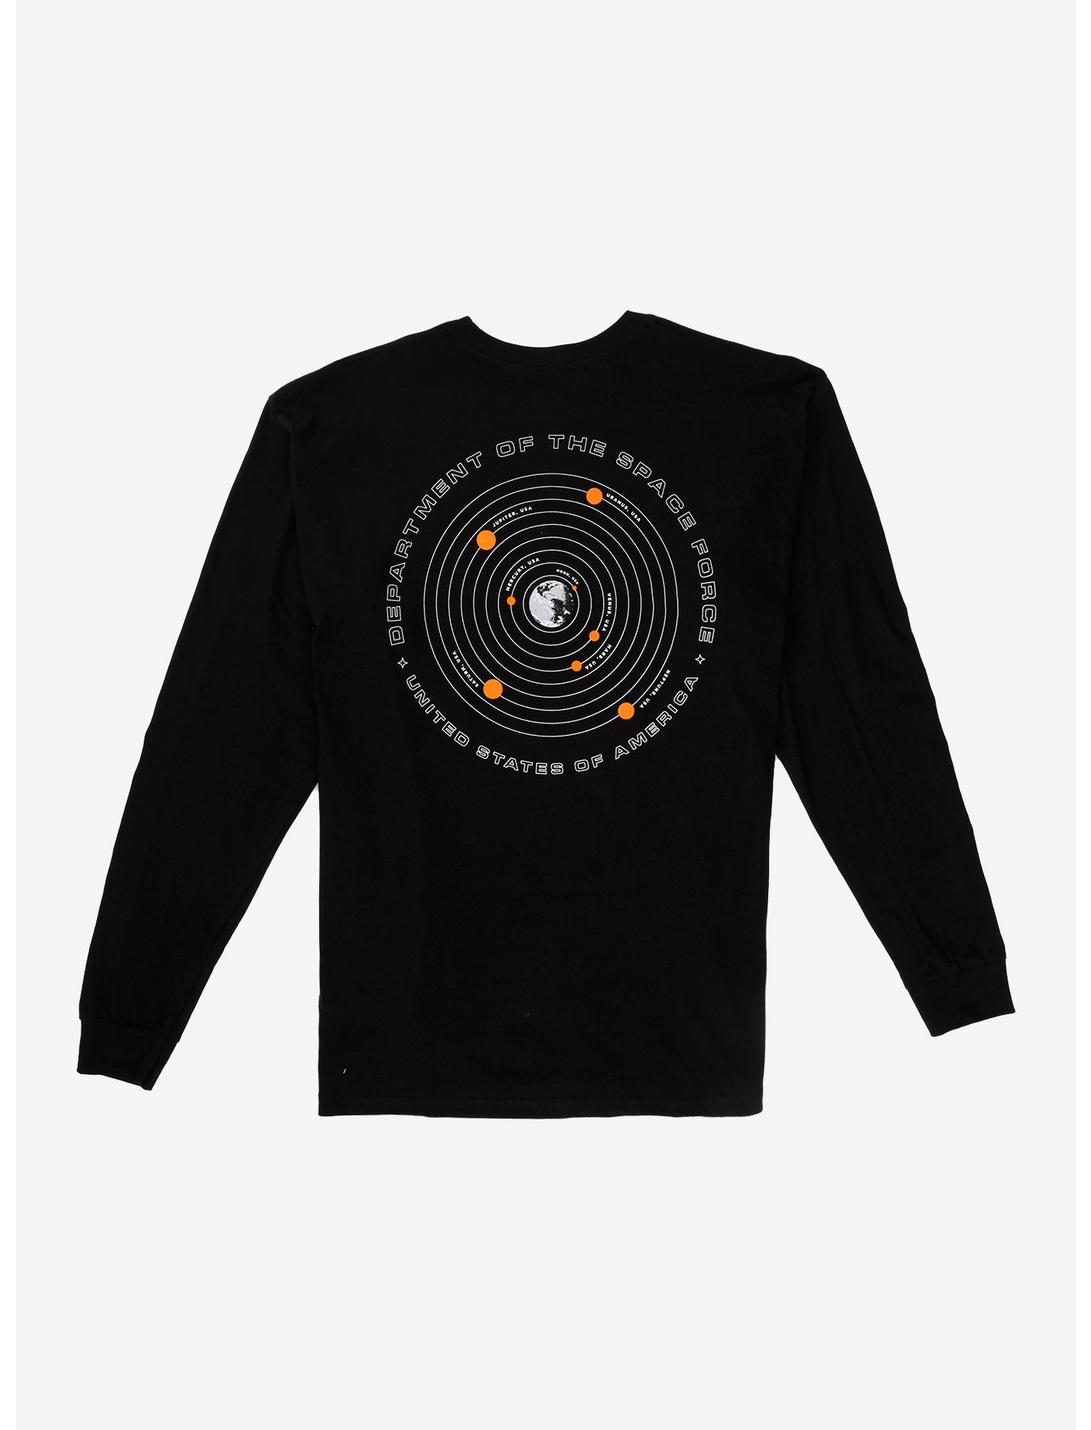 Space Force Department of the Space Force Long Sleeve T-Shirt, BLACK, hi-res